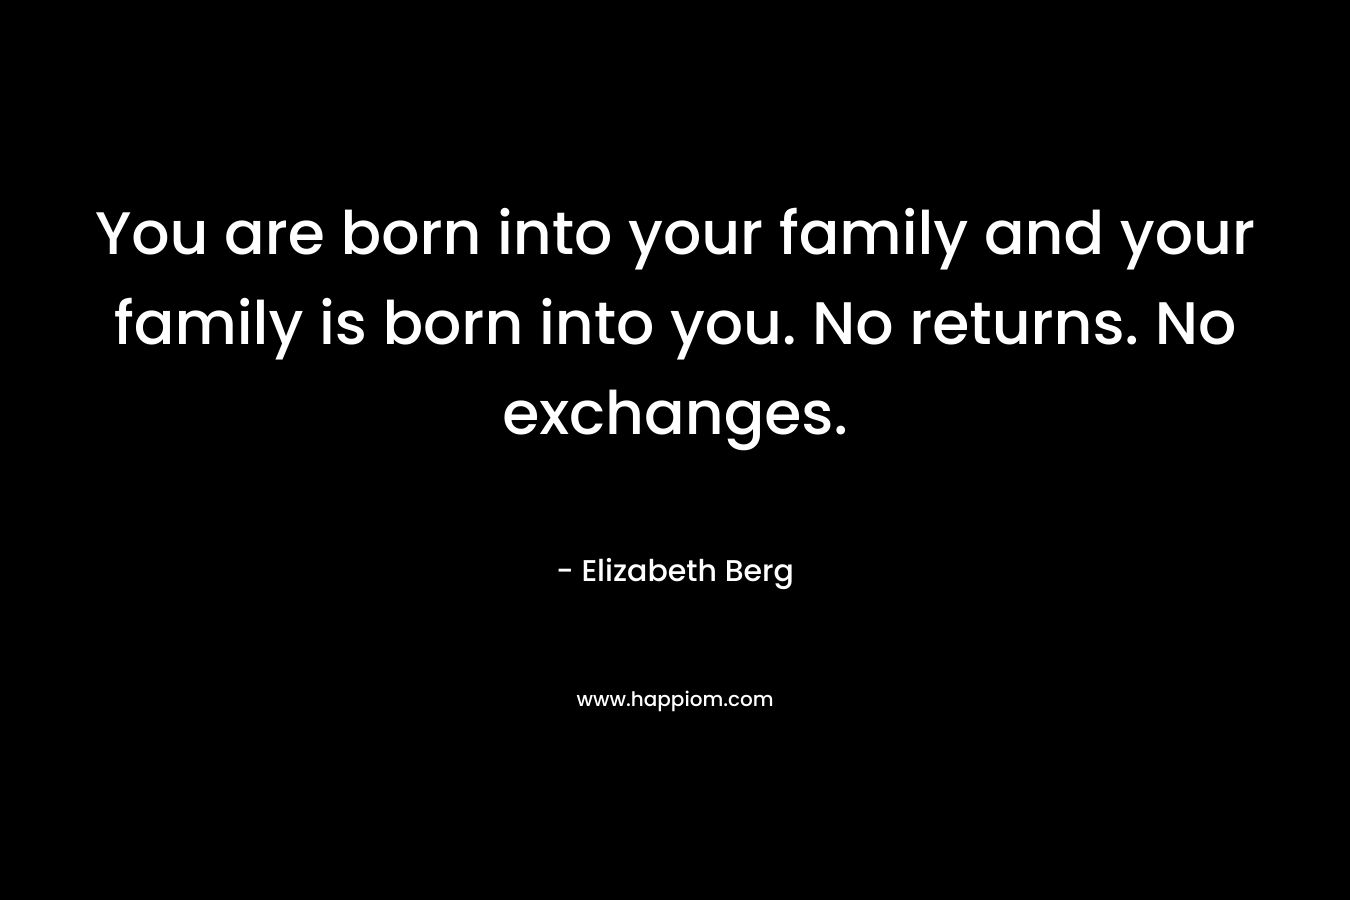 You are born into your family and your family is born into you. No returns. No exchanges.